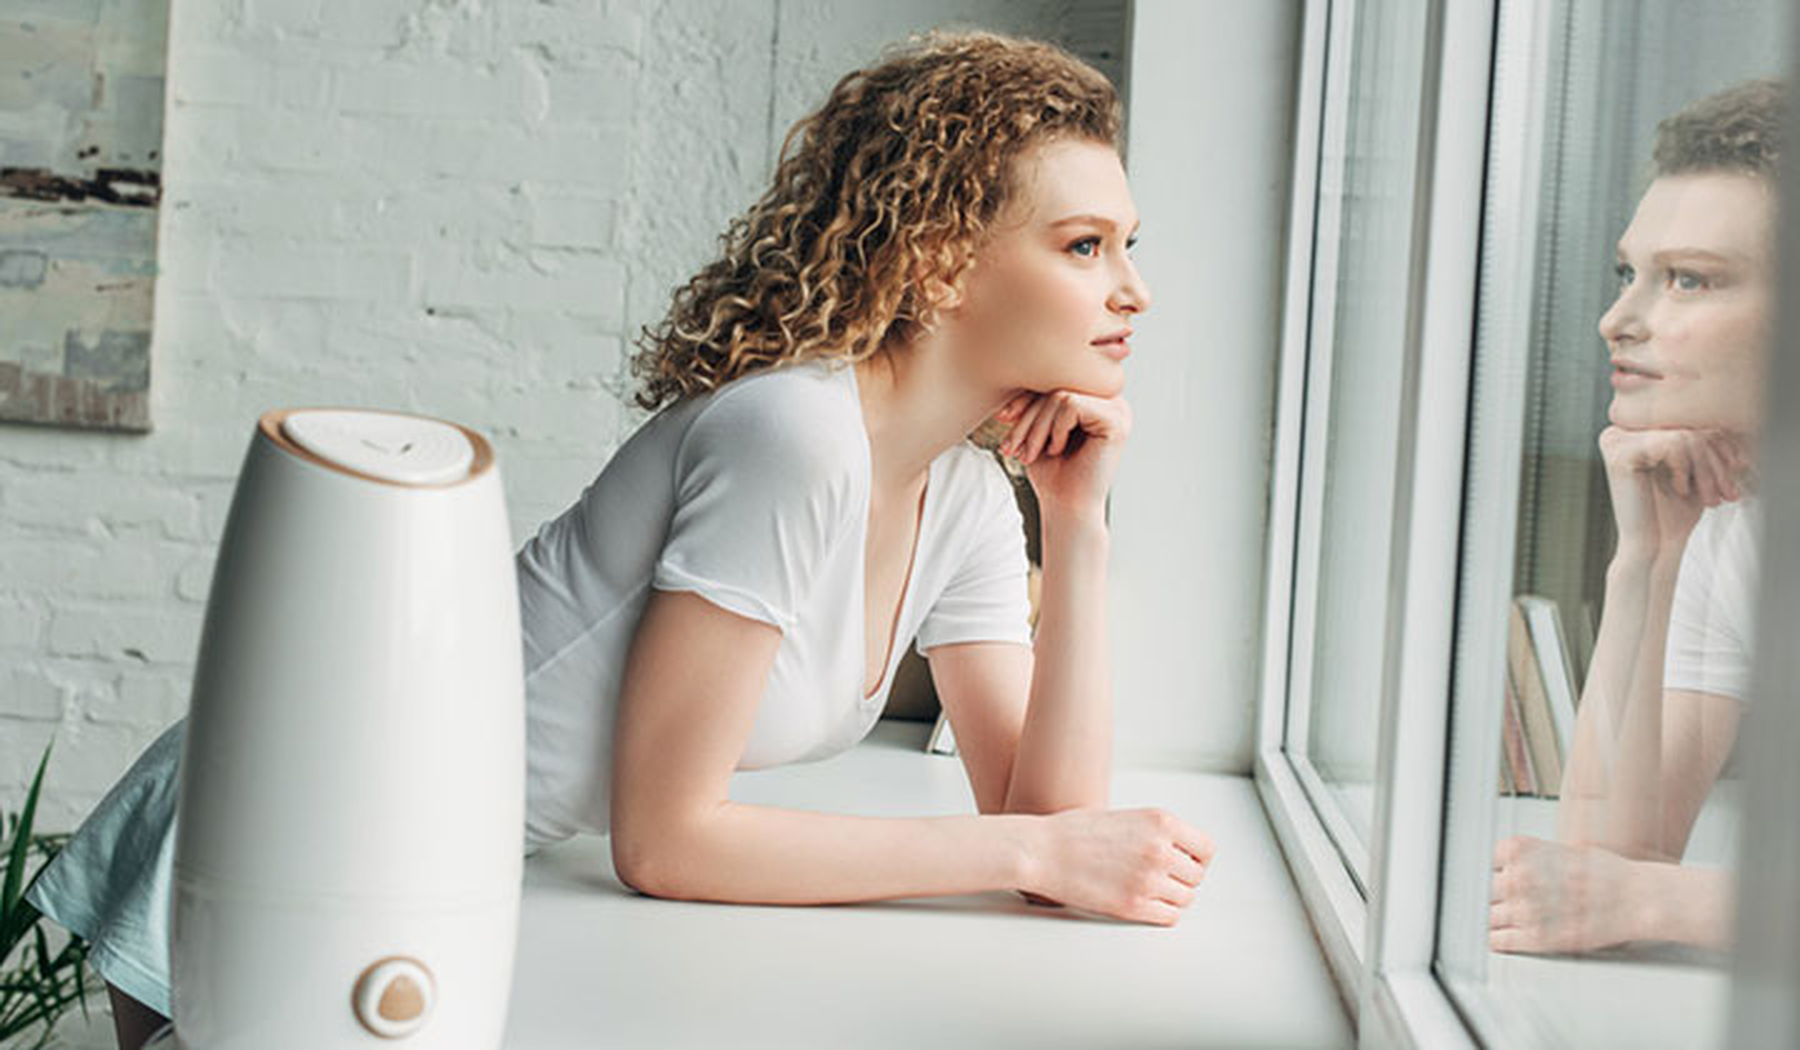 Young woman looking out window with an air purifier nearby